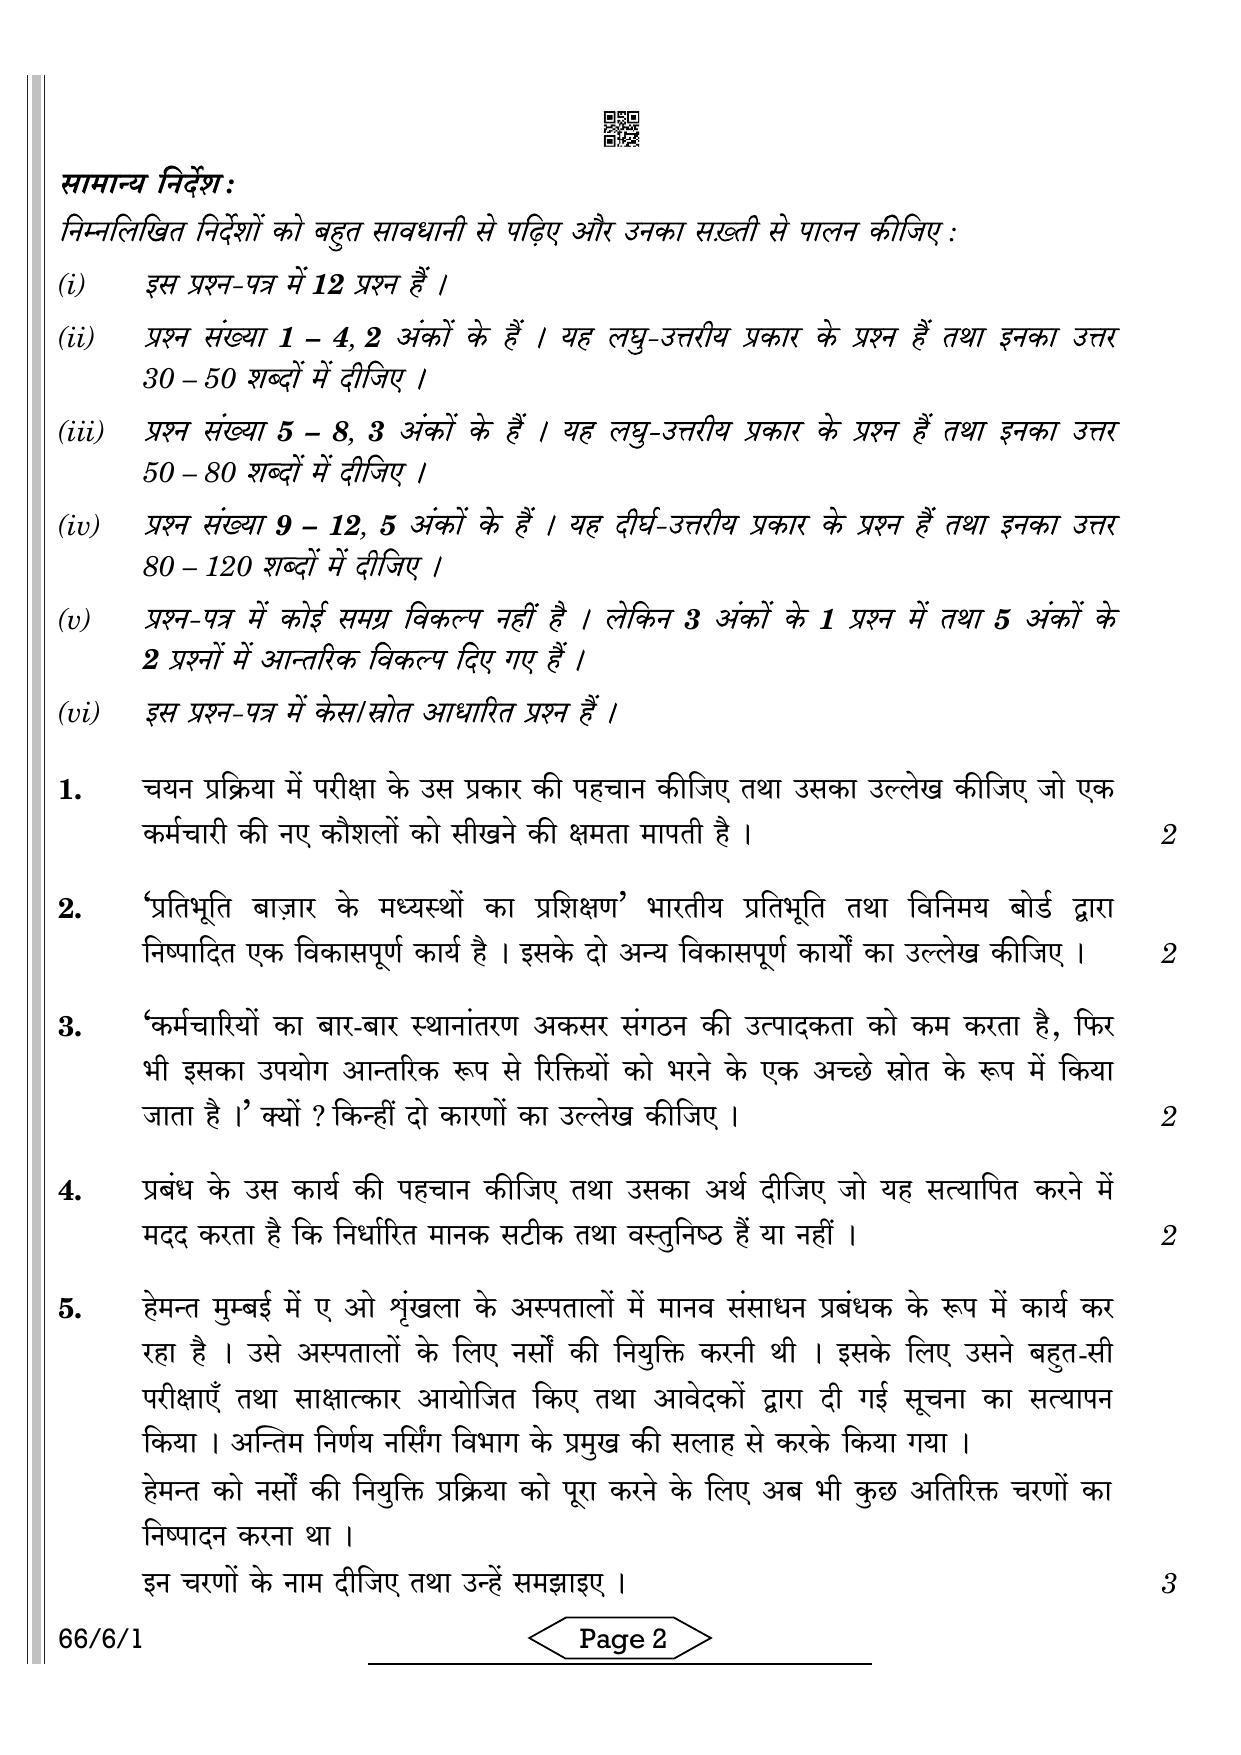 CBSE Class 12 66-6-1 BST 2022 Compartment Question Paper - Page 2